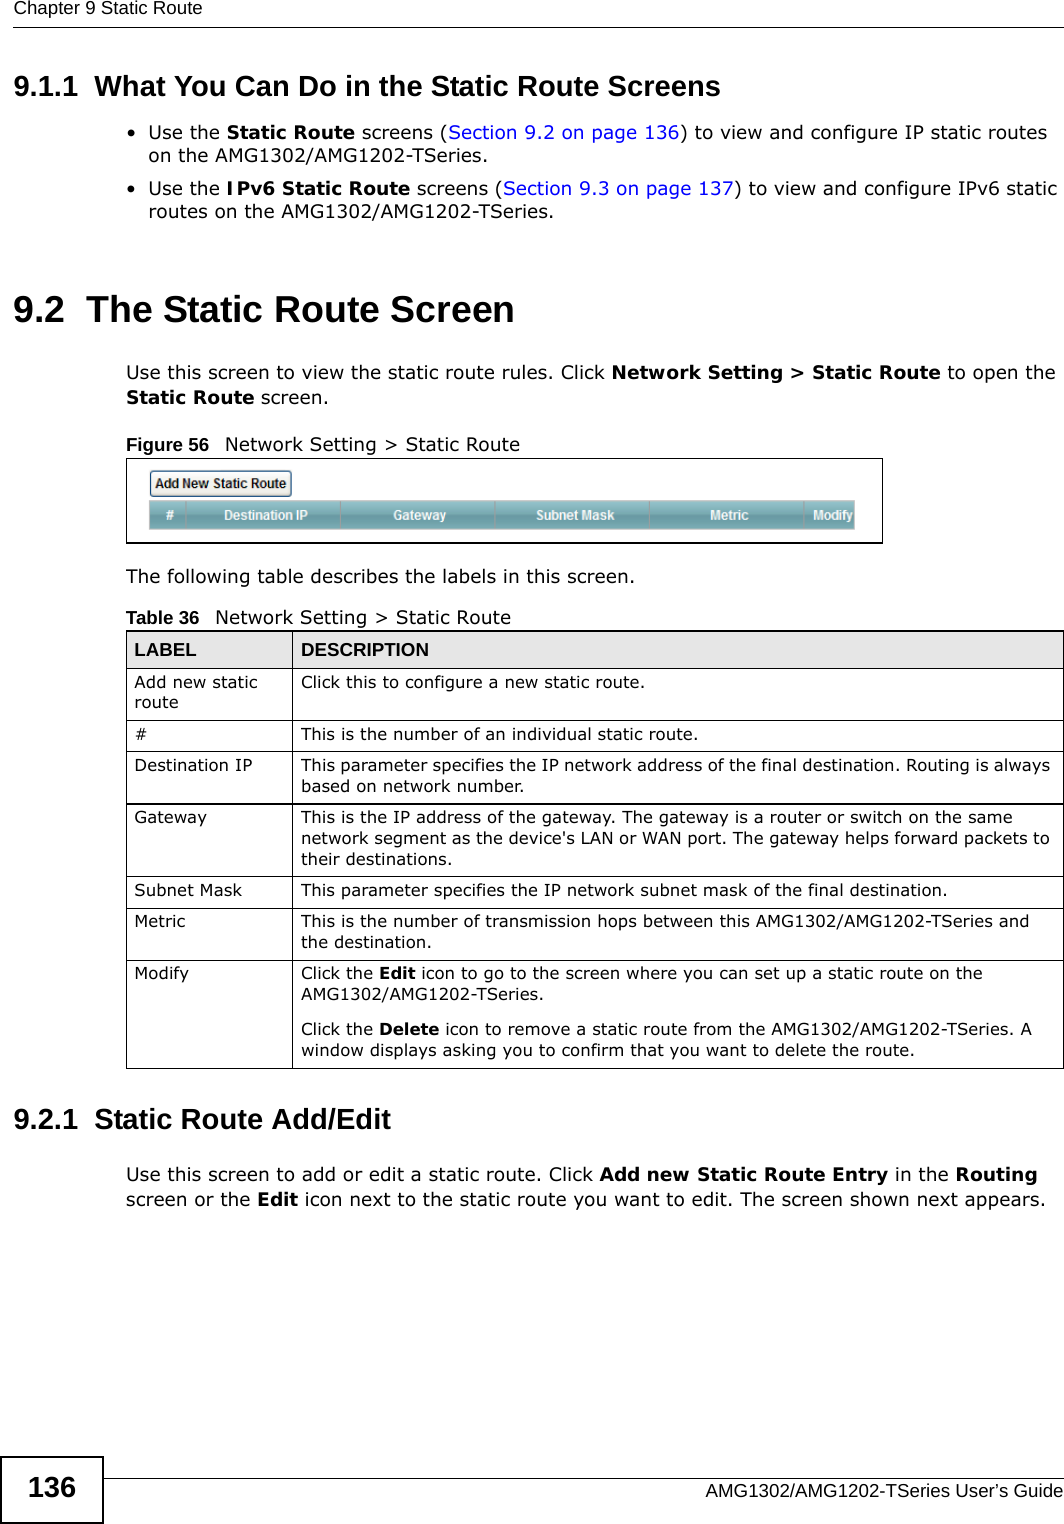 Chapter 9 Static RouteAMG1302/AMG1202-TSeries User’s Guide1369.1.1  What You Can Do in the Static Route Screens•Use the Static Route screens (Section 9.2 on page 136) to view and configure IP static routes on the AMG1302/AMG1202-TSeries.•Use the IPv6 Static Route screens (Section 9.3 on page 137) to view and configure IPv6 static routes on the AMG1302/AMG1202-TSeries.9.2  The Static Route ScreenUse this screen to view the static route rules. Click Network Setting &gt; Static Route to open the Static Route screen.Figure 56   Network Setting &gt; Static RouteThe following table describes the labels in this screen. 9.2.1  Static Route Add/Edit   Use this screen to add or edit a static route. Click Add new Static Route Entry in the Routing screen or the Edit icon next to the static route you want to edit. The screen shown next appears.Table 36   Network Setting &gt; Static RouteLABEL DESCRIPTIONAdd new static routeClick this to configure a new static route.#This is the number of an individual static route.Destination IP This parameter specifies the IP network address of the final destination. Routing is always based on network number. Gateway This is the IP address of the gateway. The gateway is a router or switch on the same network segment as the device&apos;s LAN or WAN port. The gateway helps forward packets to their destinations.Subnet Mask This parameter specifies the IP network subnet mask of the final destination.Metric This is the number of transmission hops between this AMG1302/AMG1202-TSeries and the destination.Modify Click the Edit icon to go to the screen where you can set up a static route on the AMG1302/AMG1202-TSeries.Click the Delete icon to remove a static route from the AMG1302/AMG1202-TSeries. A window displays asking you to confirm that you want to delete the route. 